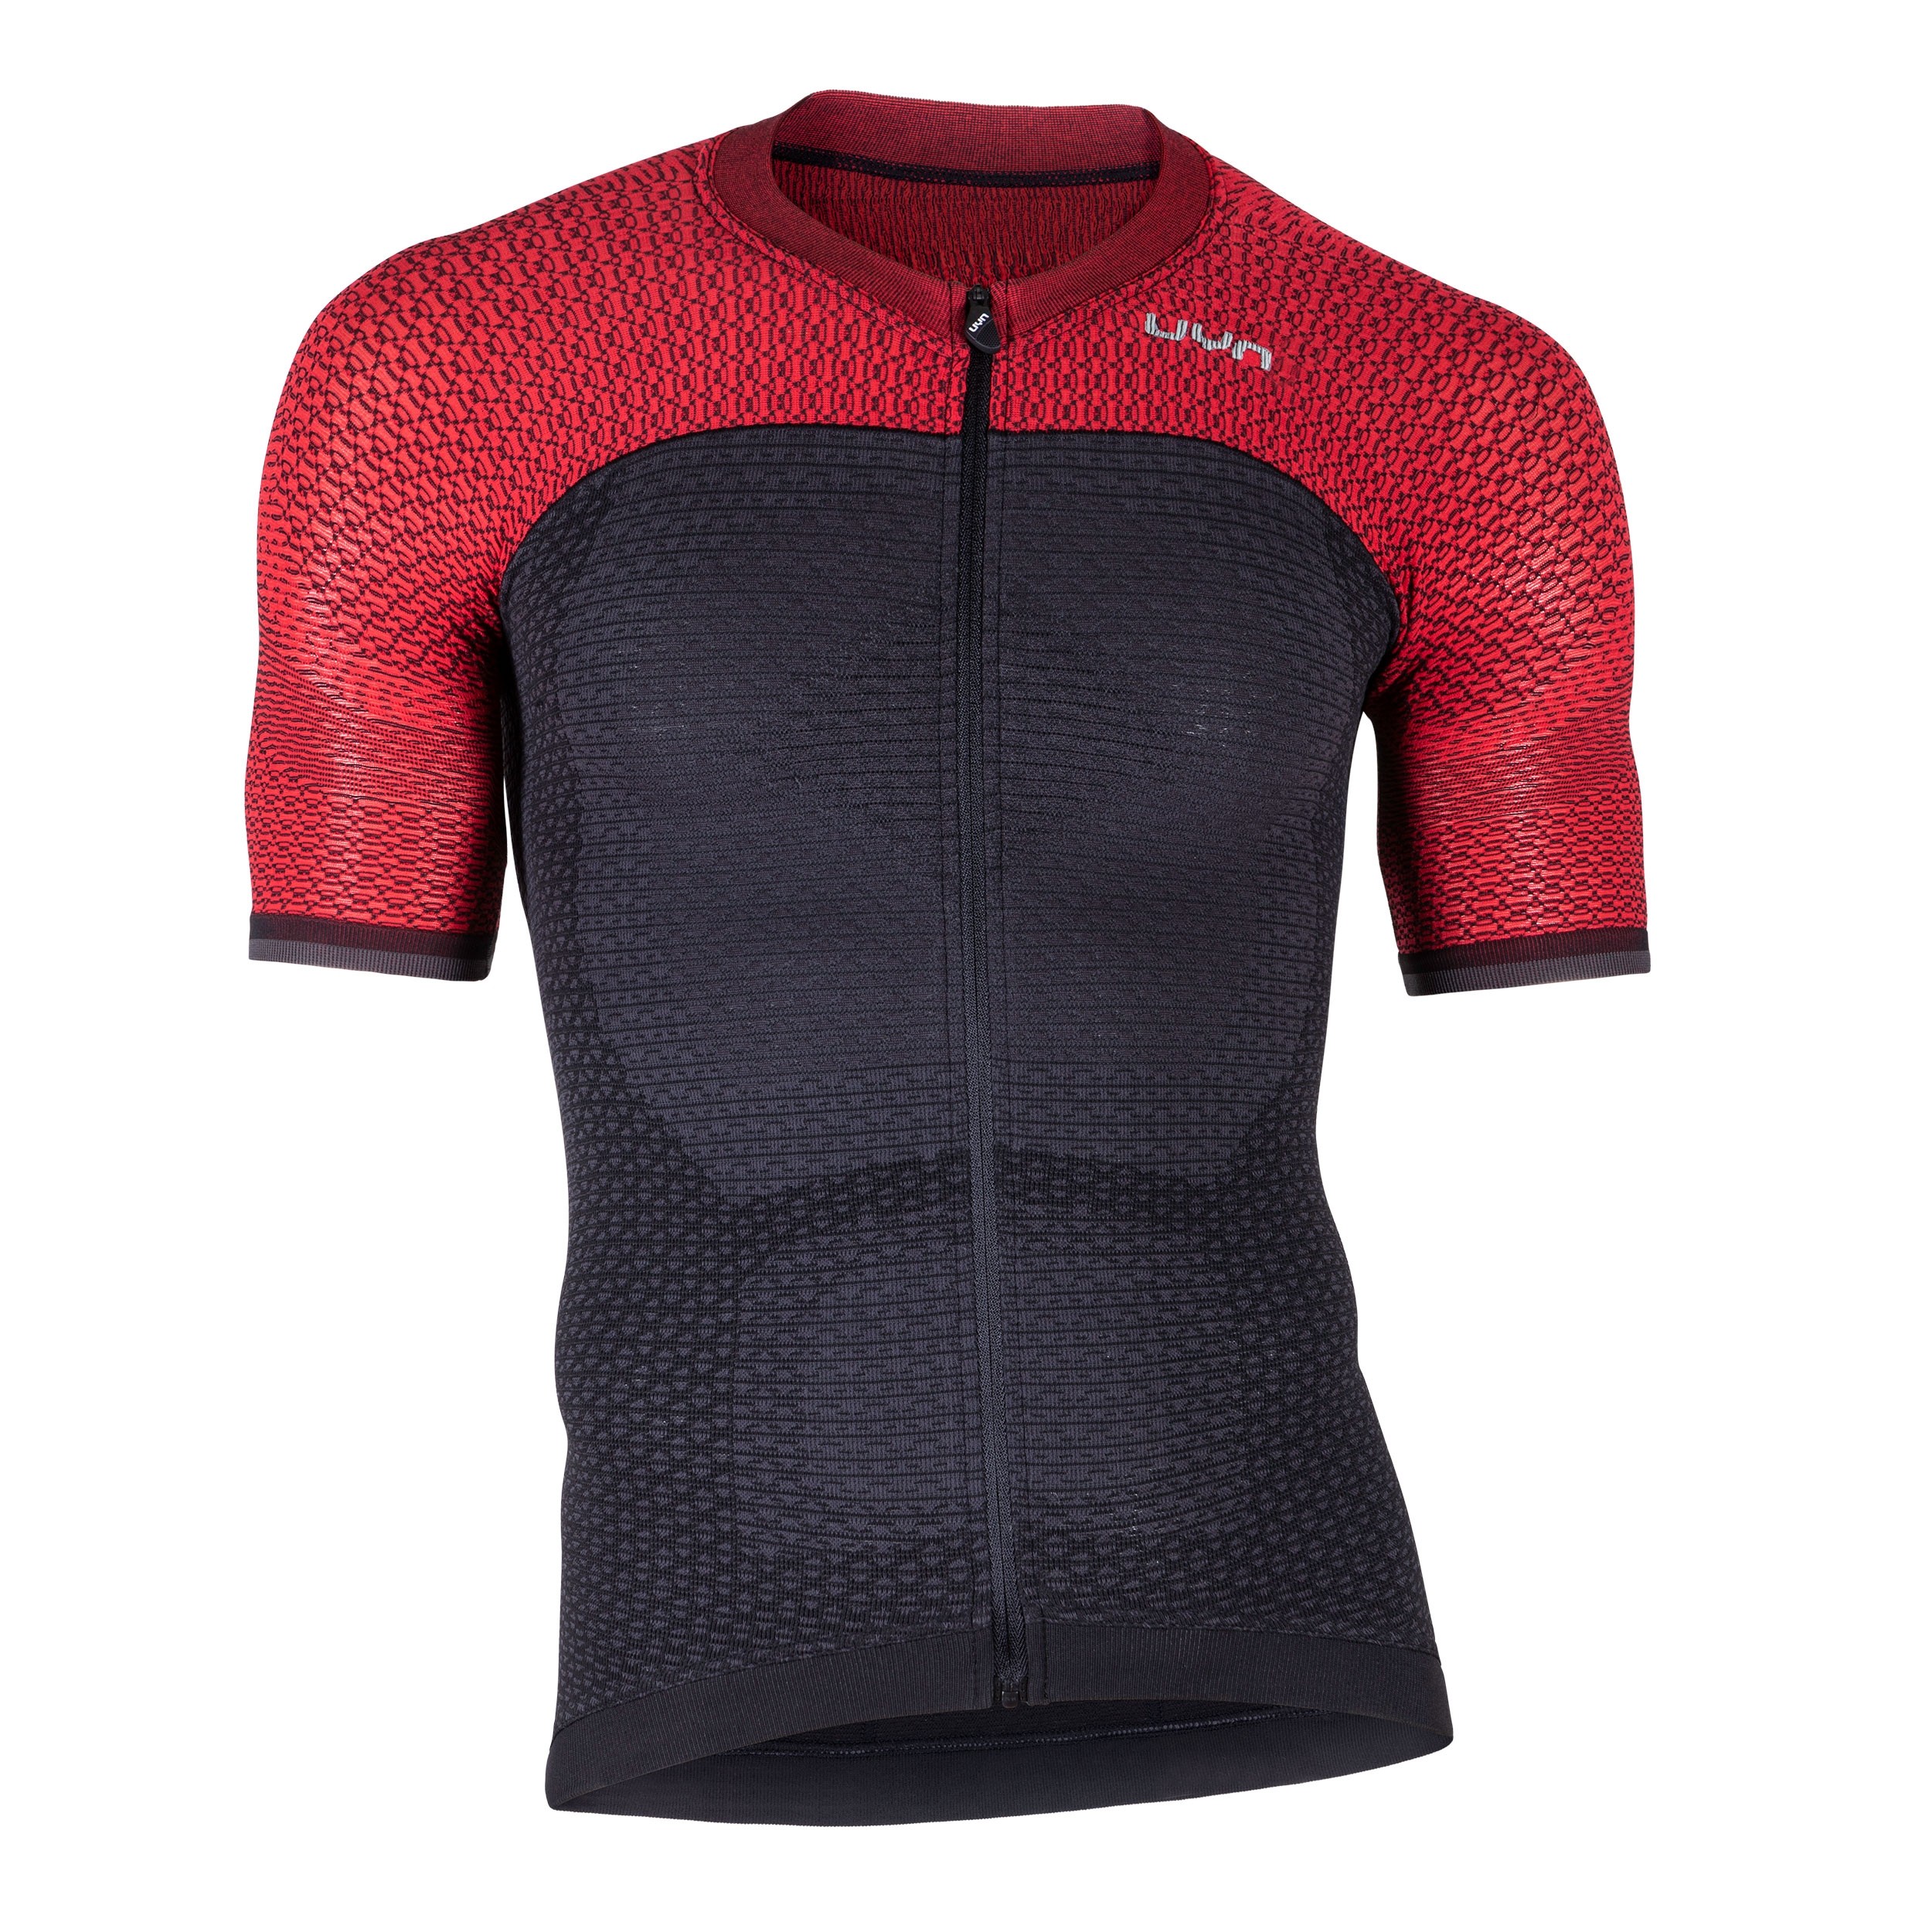 Uyn alpha cycling jersey short sleeves charcoal grey bitter red